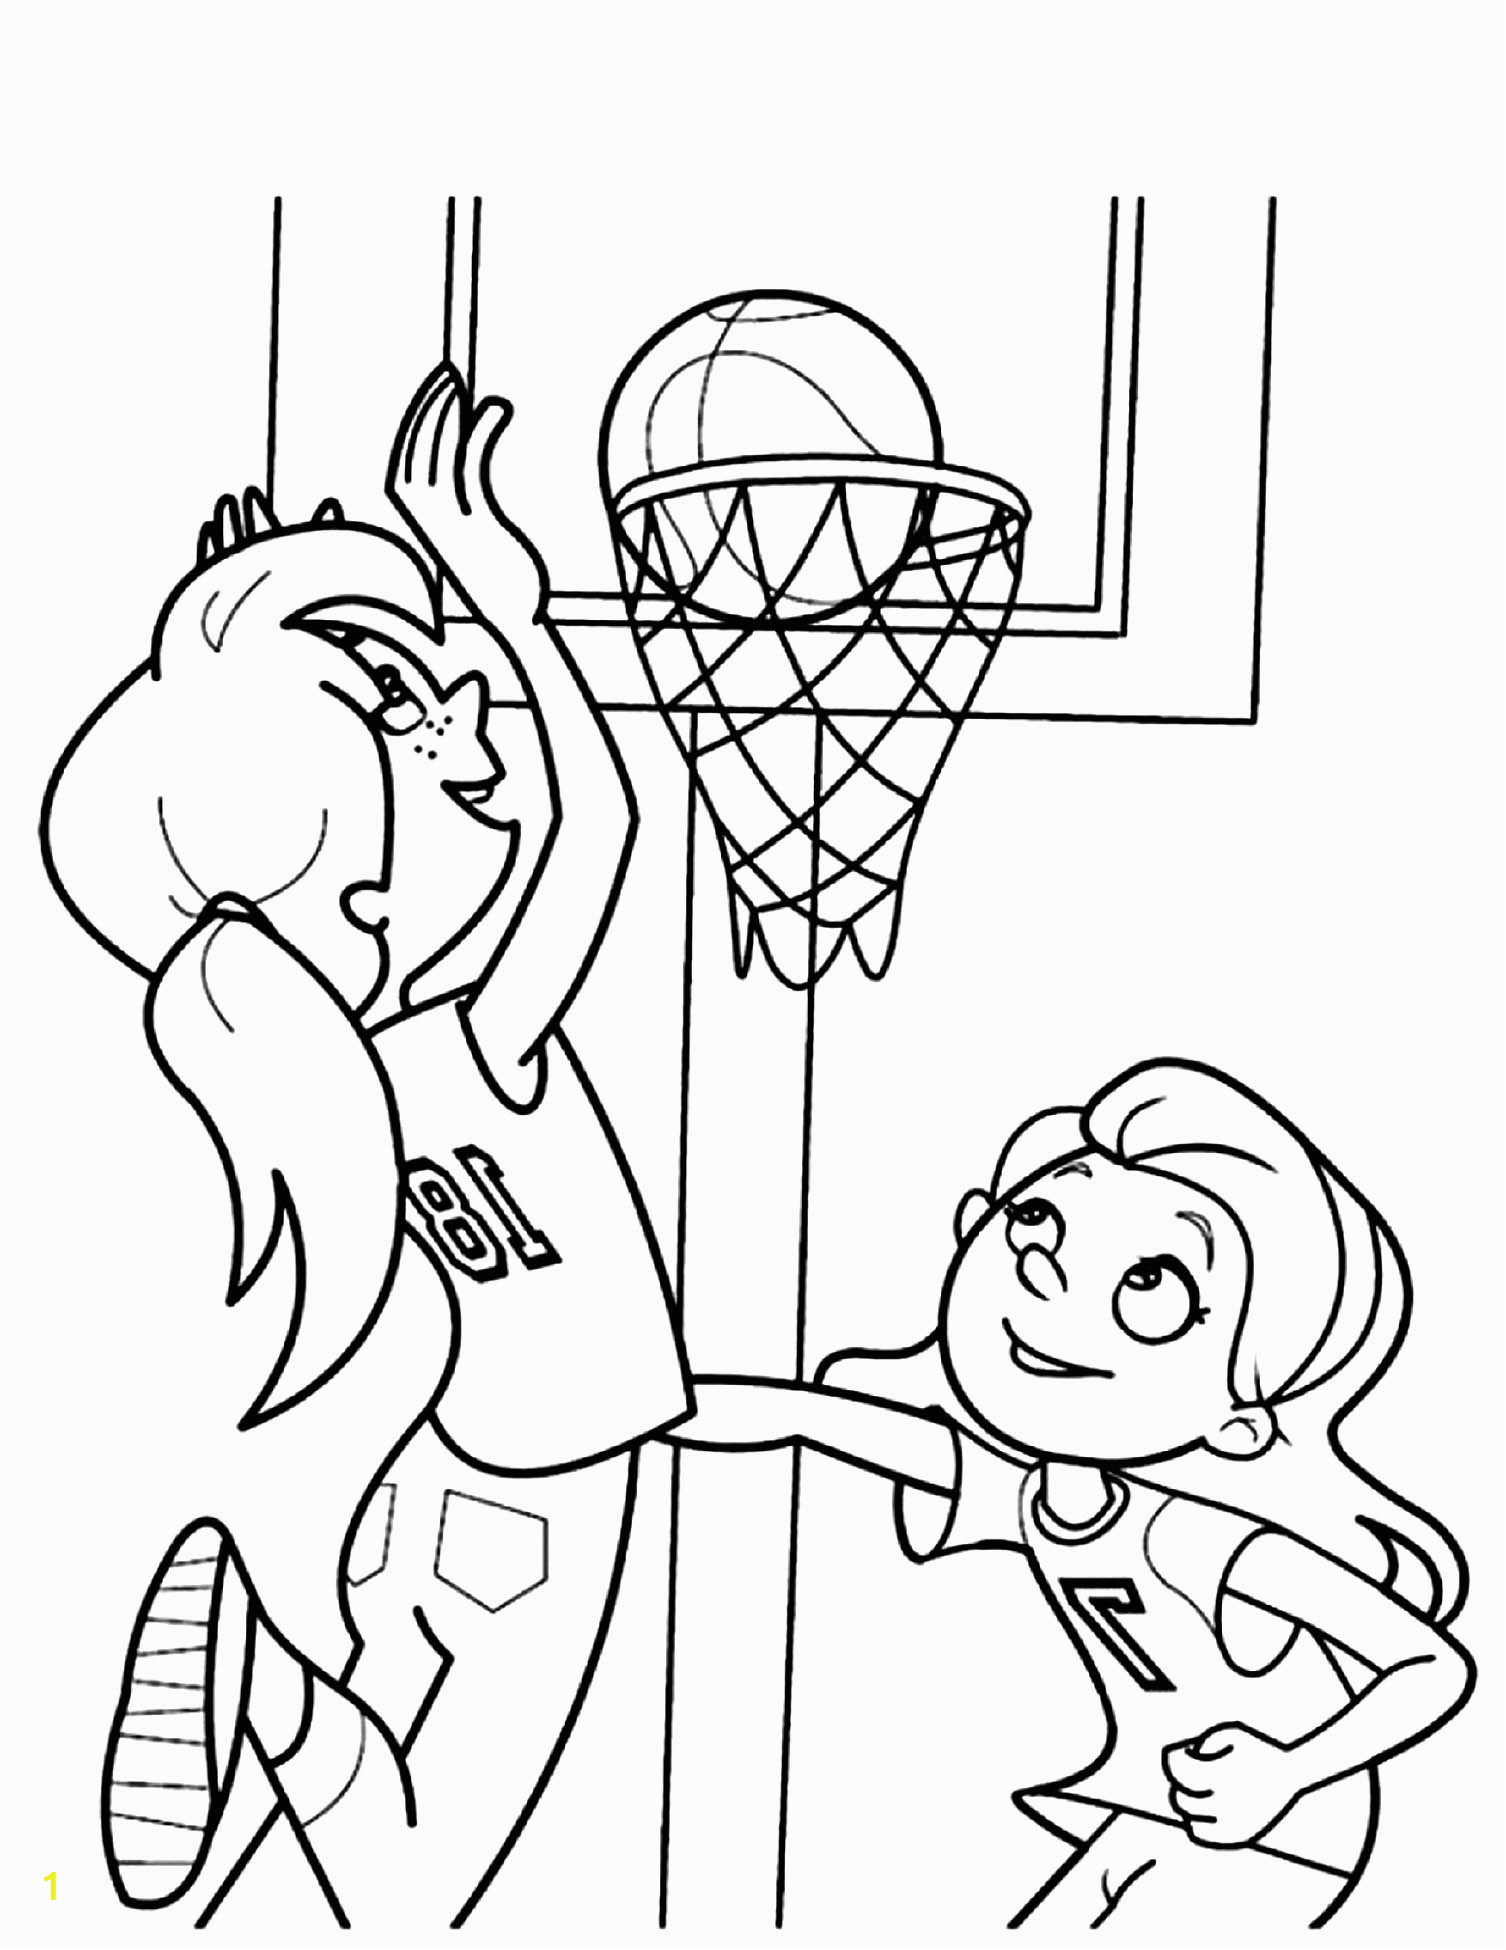 image=basketball coloring pages for children basketball 1